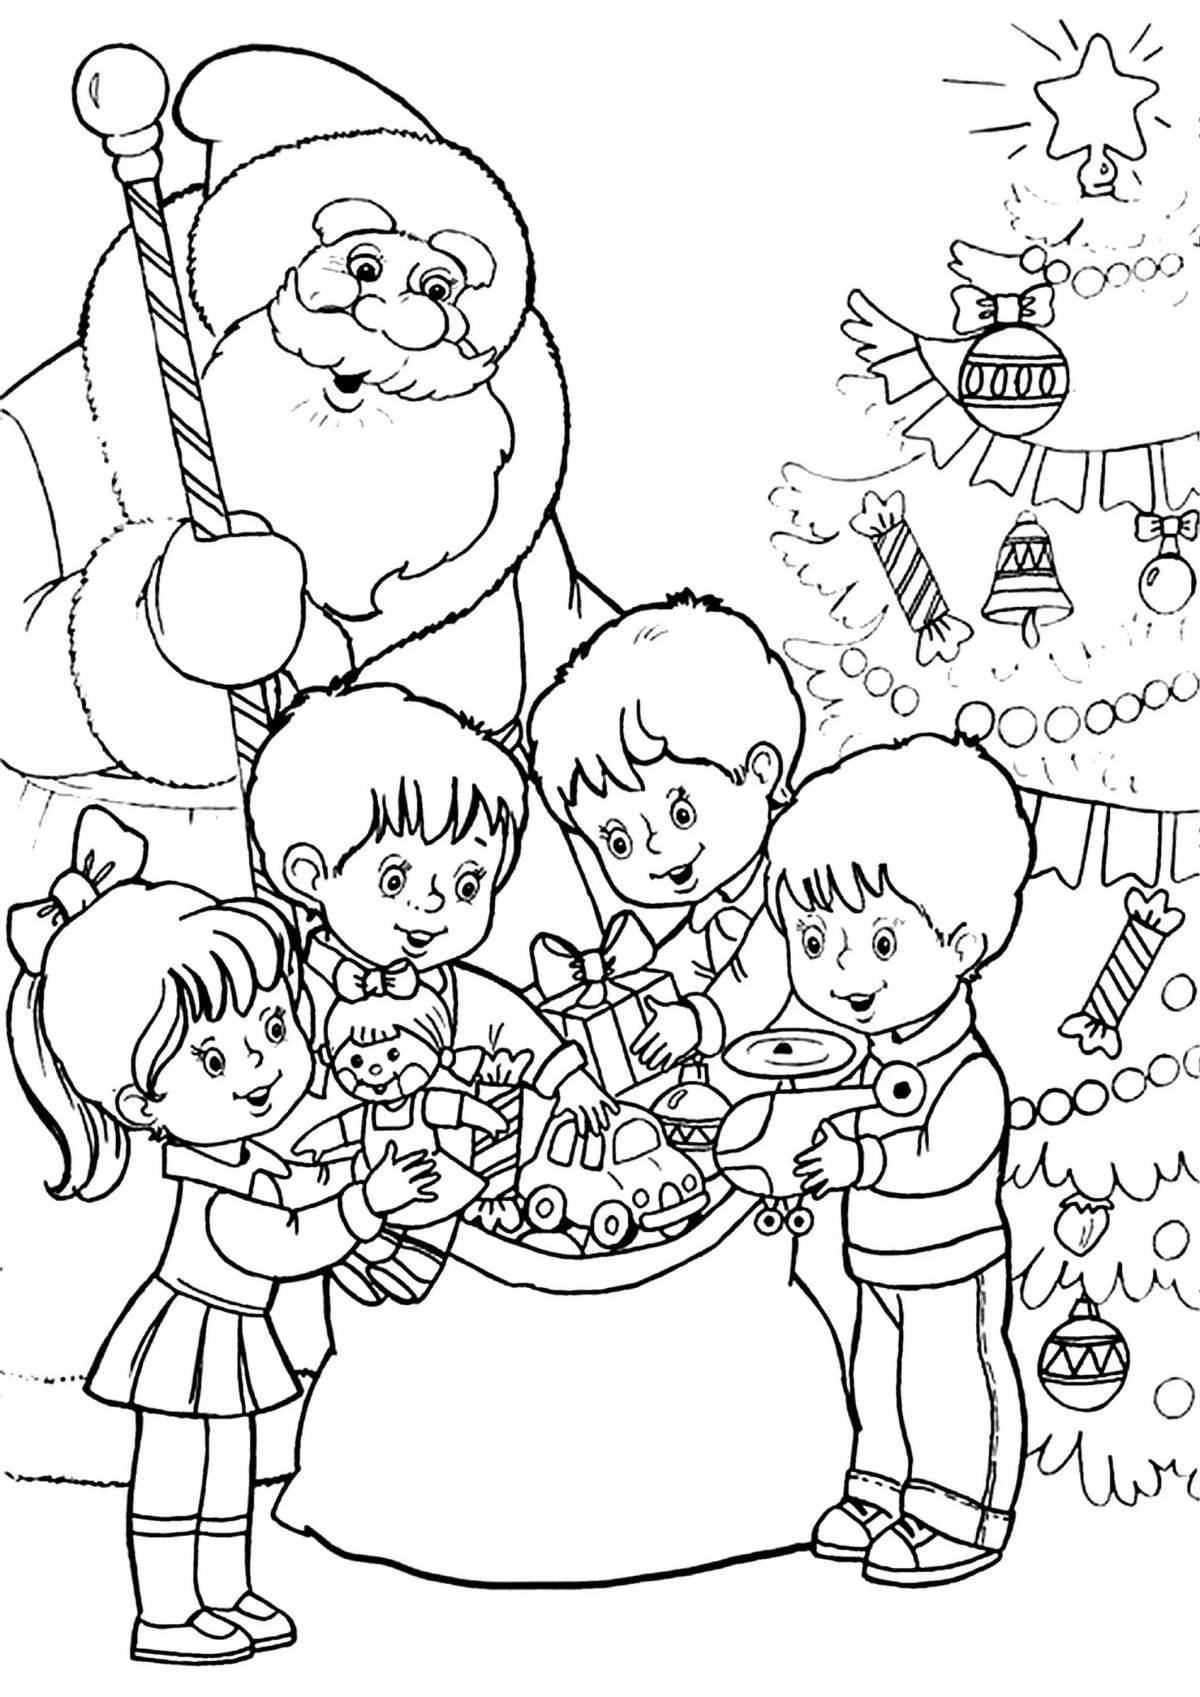 Colouring Merry Christmas holidays